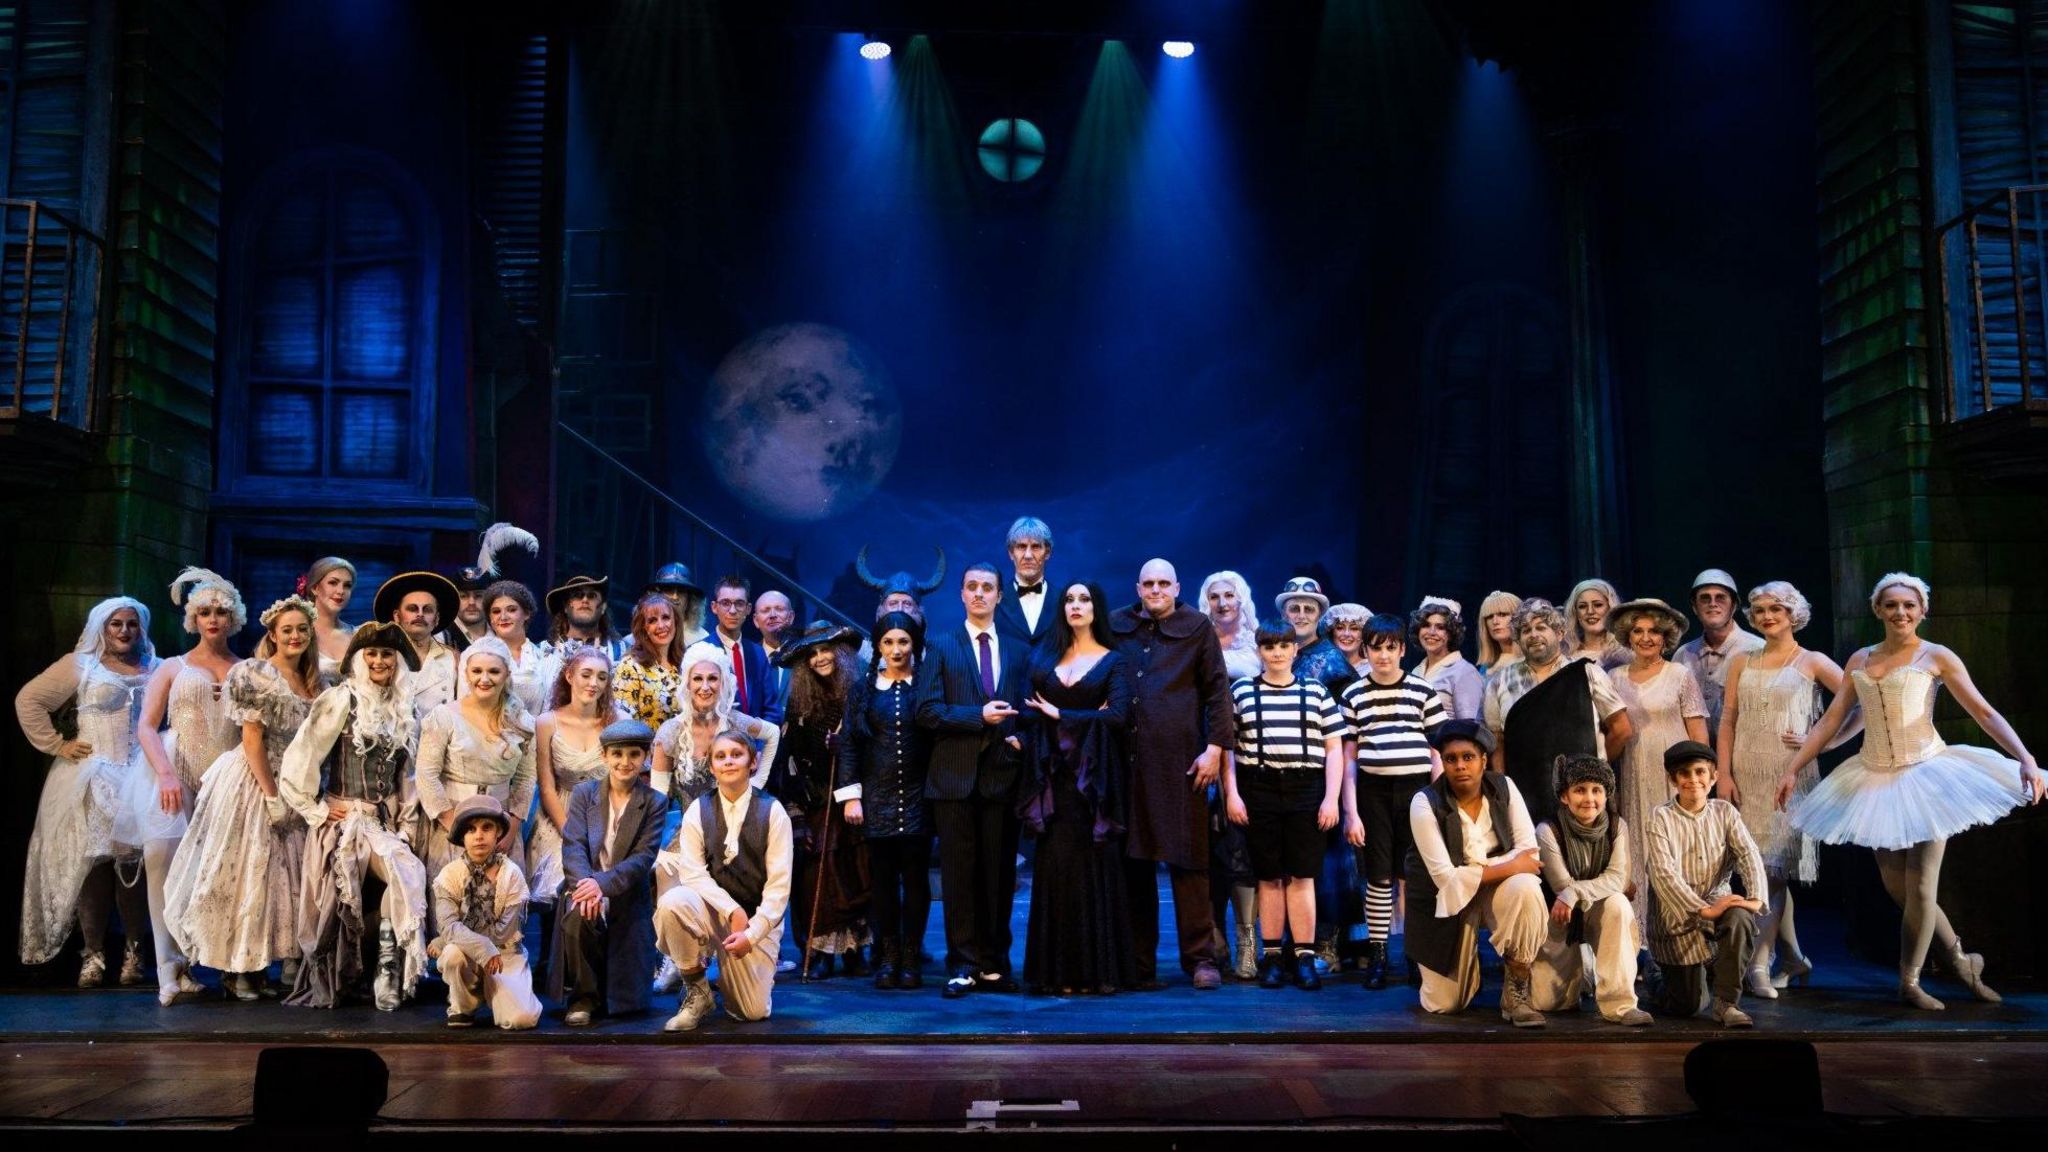 Cast of The Addams Family on stage